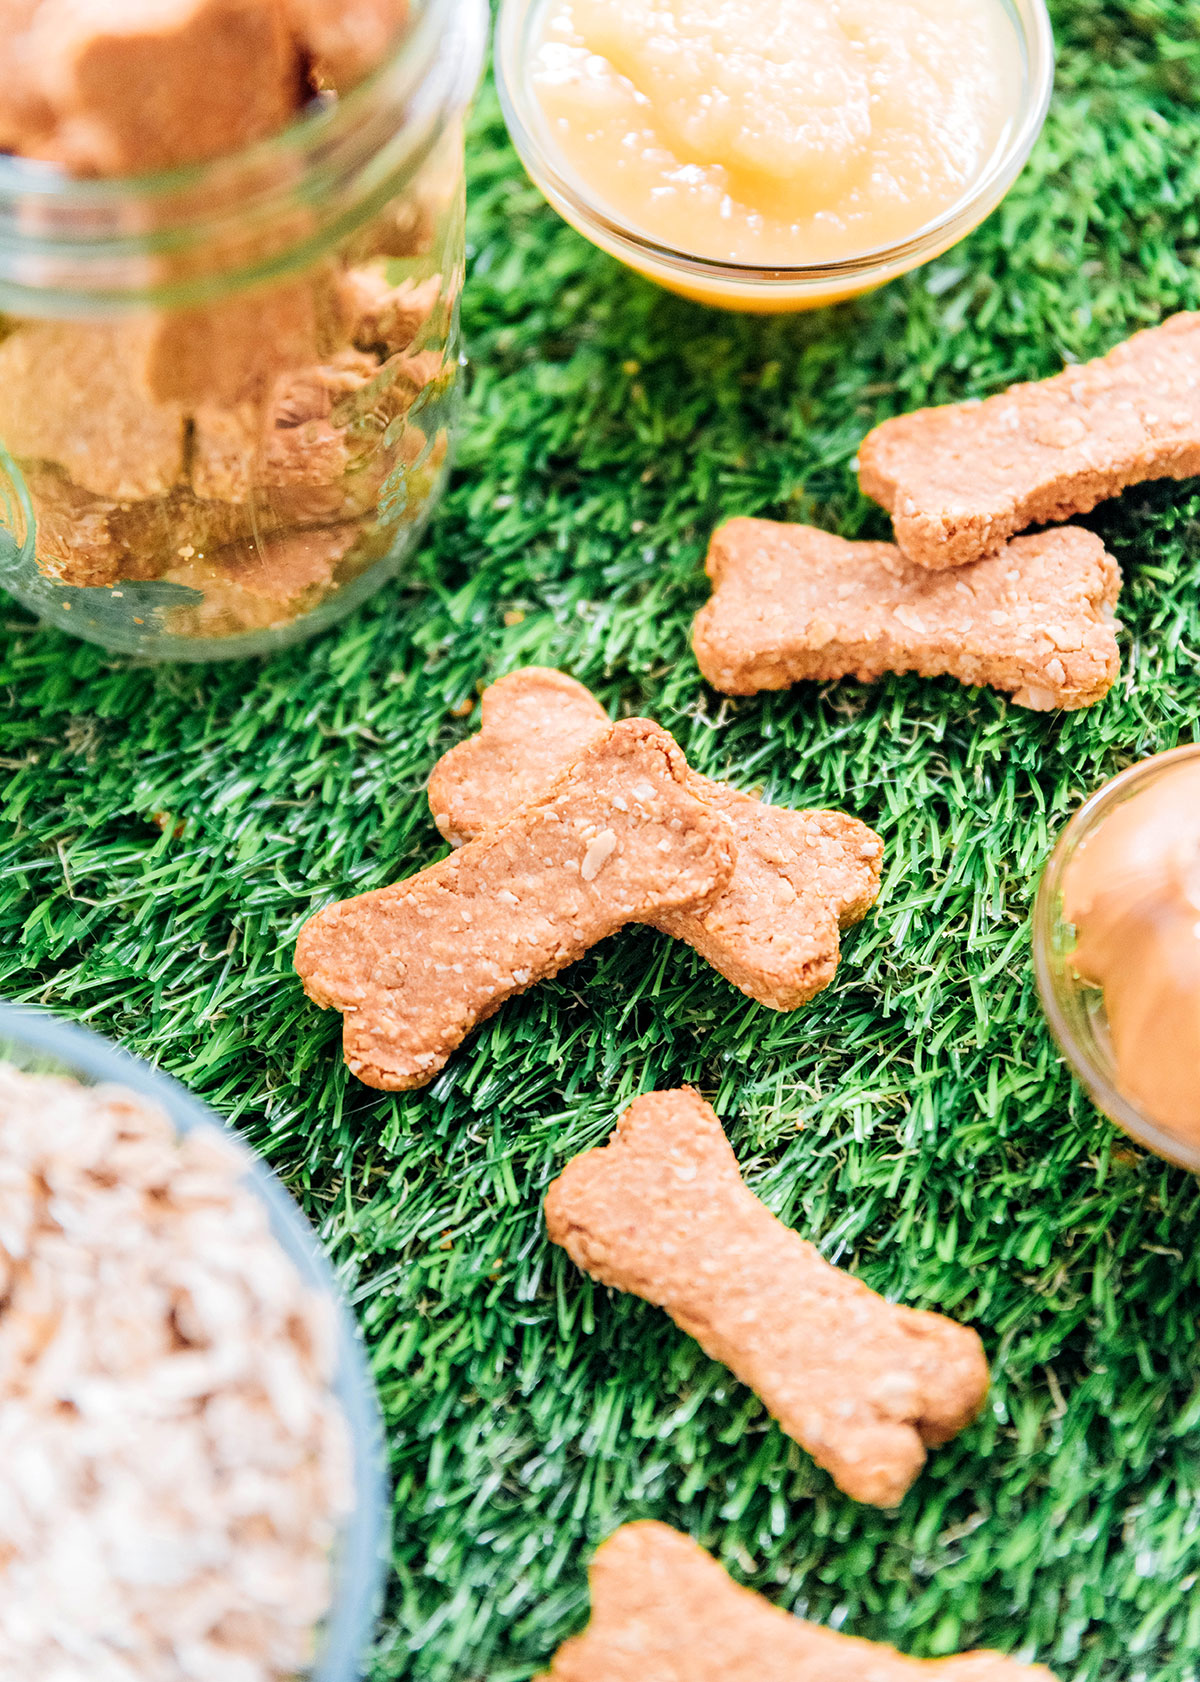 close up of dog biscuits on grass and surrounded by the ingredients.